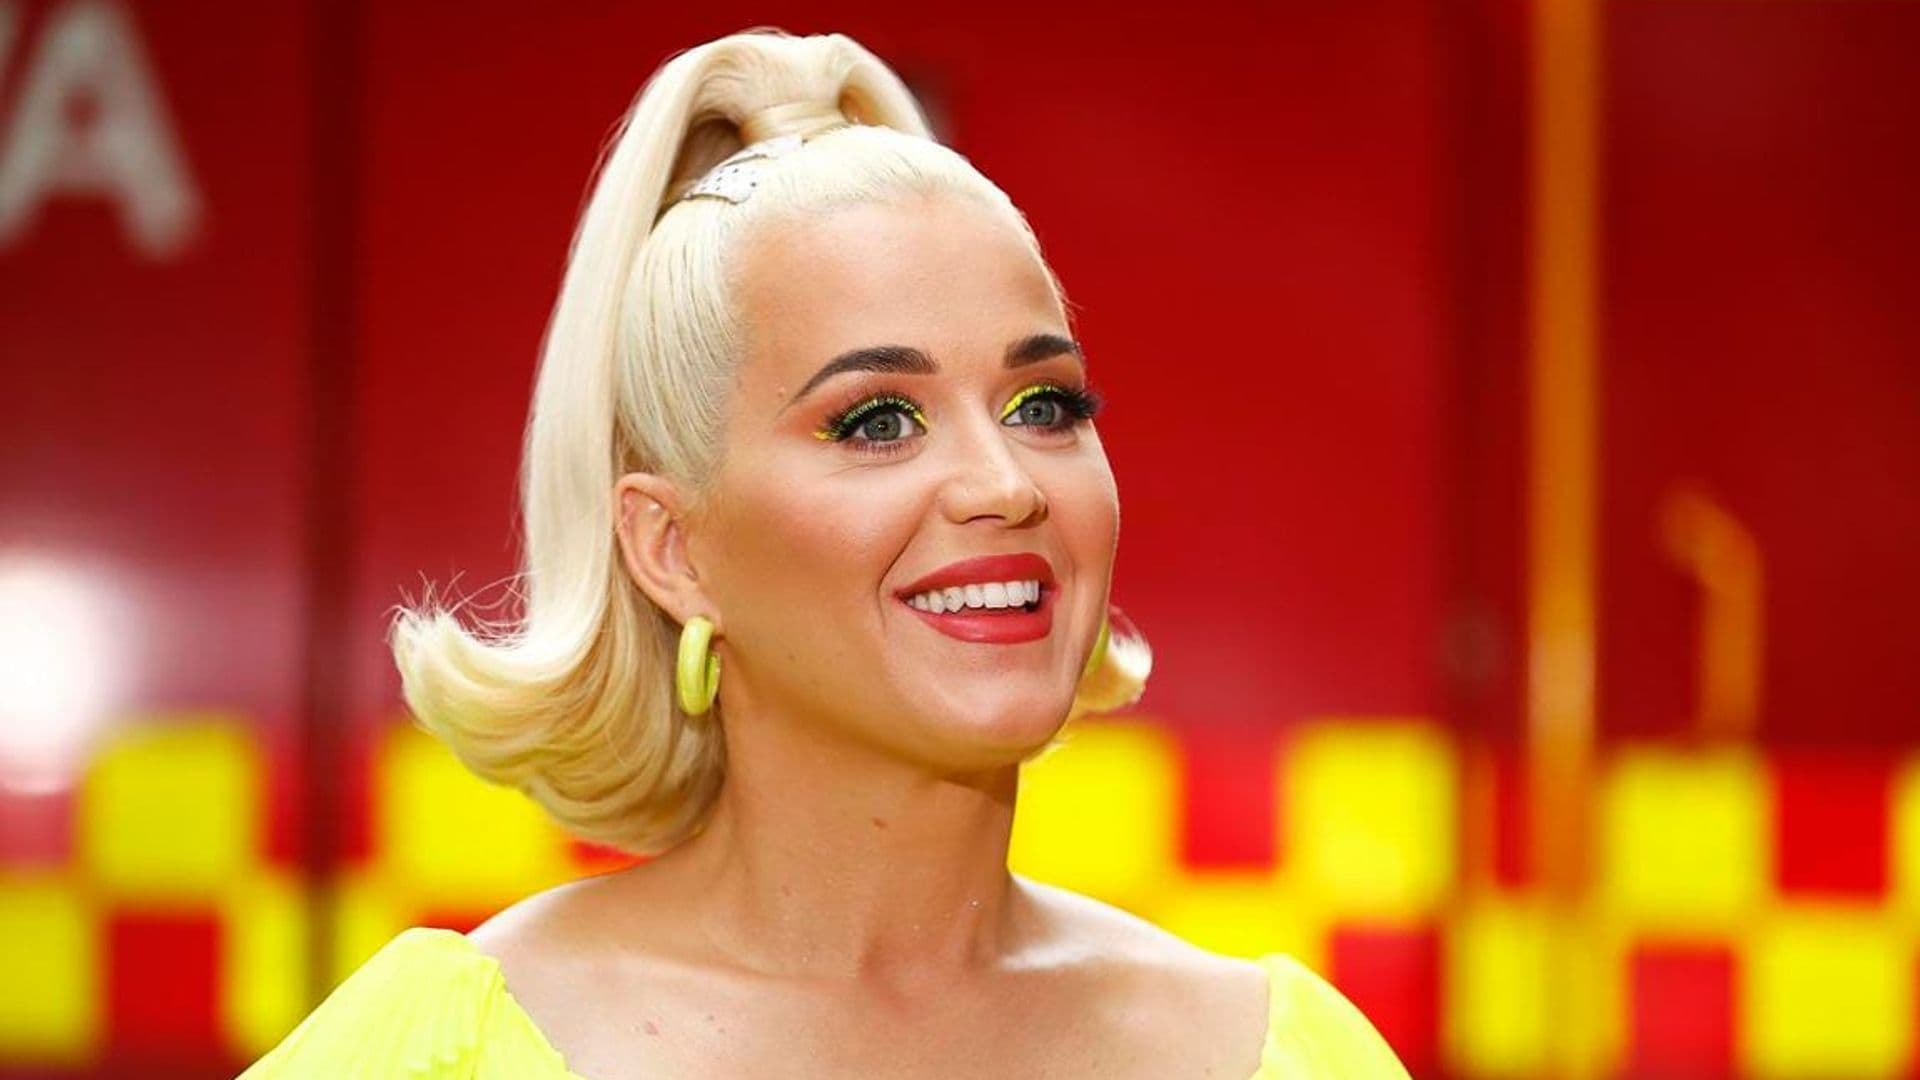 Katy Perry’s battle with depression during lockdown, Matt Damon’s daughter recovers, Rosalia’s skateboard fail and more news